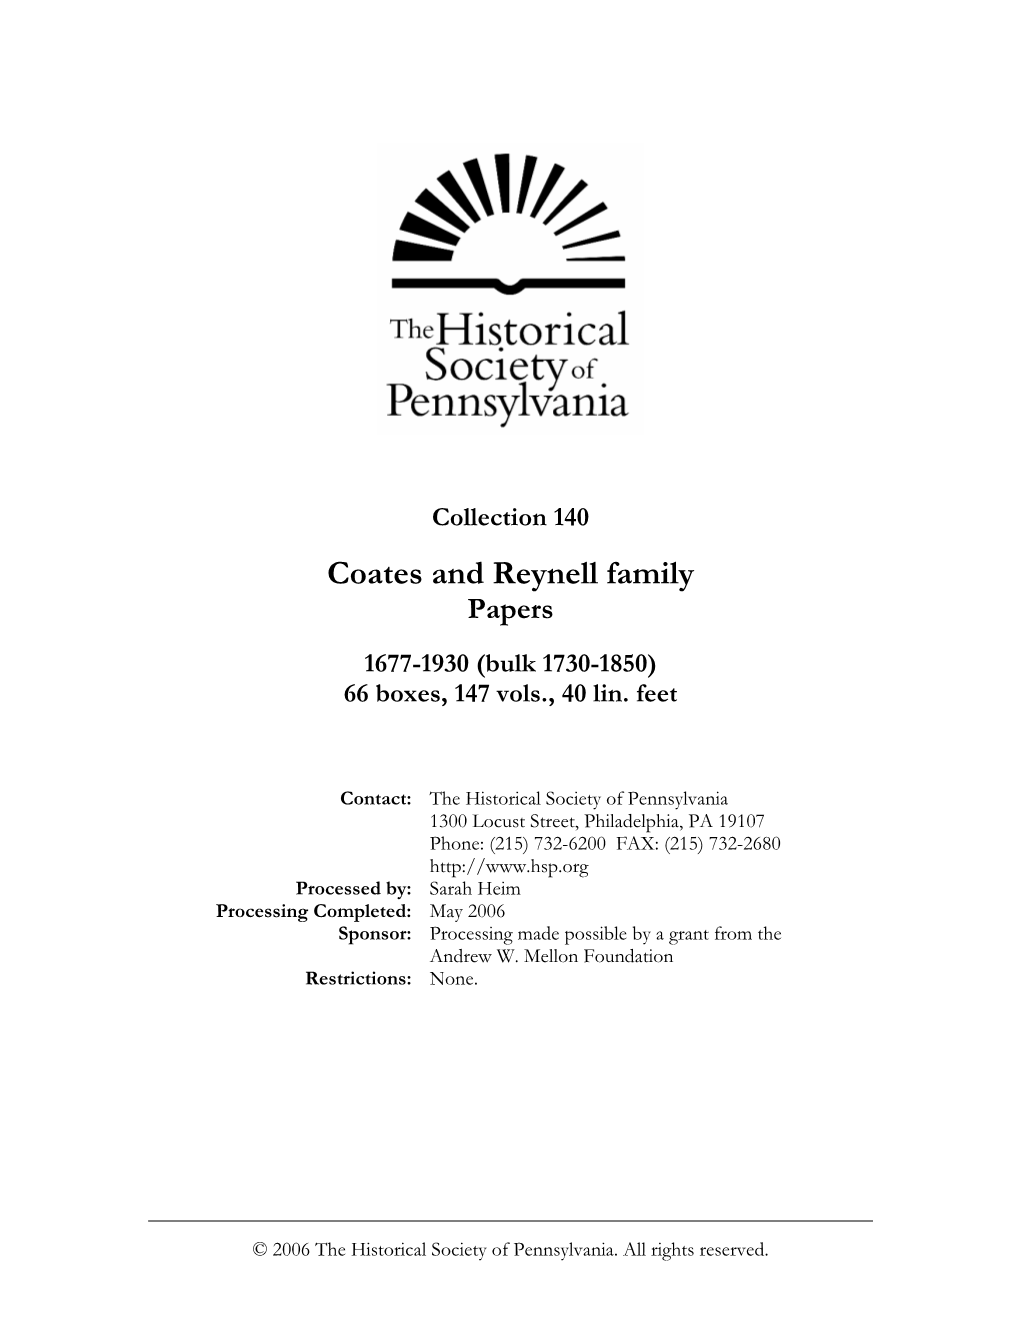 Coates and Reynell Family Papers